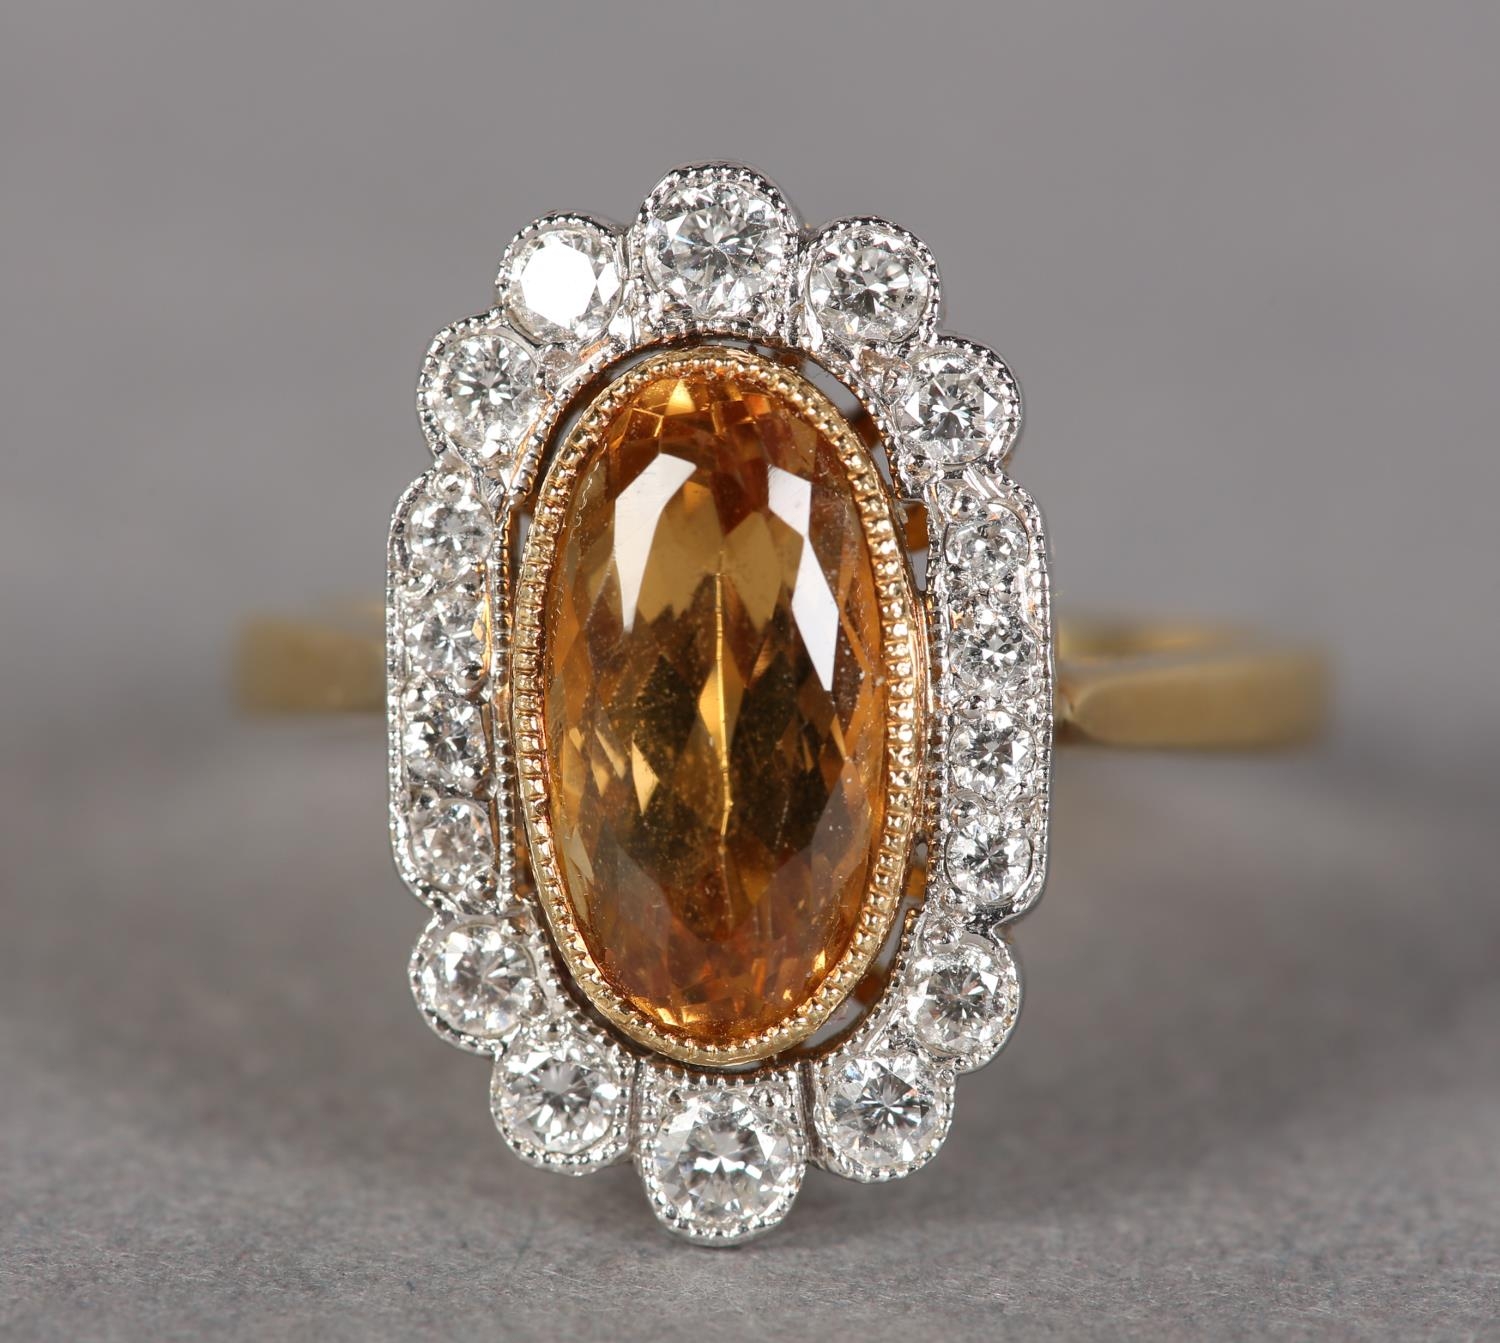 A TOPAZ AND DIAMOND CLUSTER RING in 18ct yellow and white gold, collet set to the centre with an